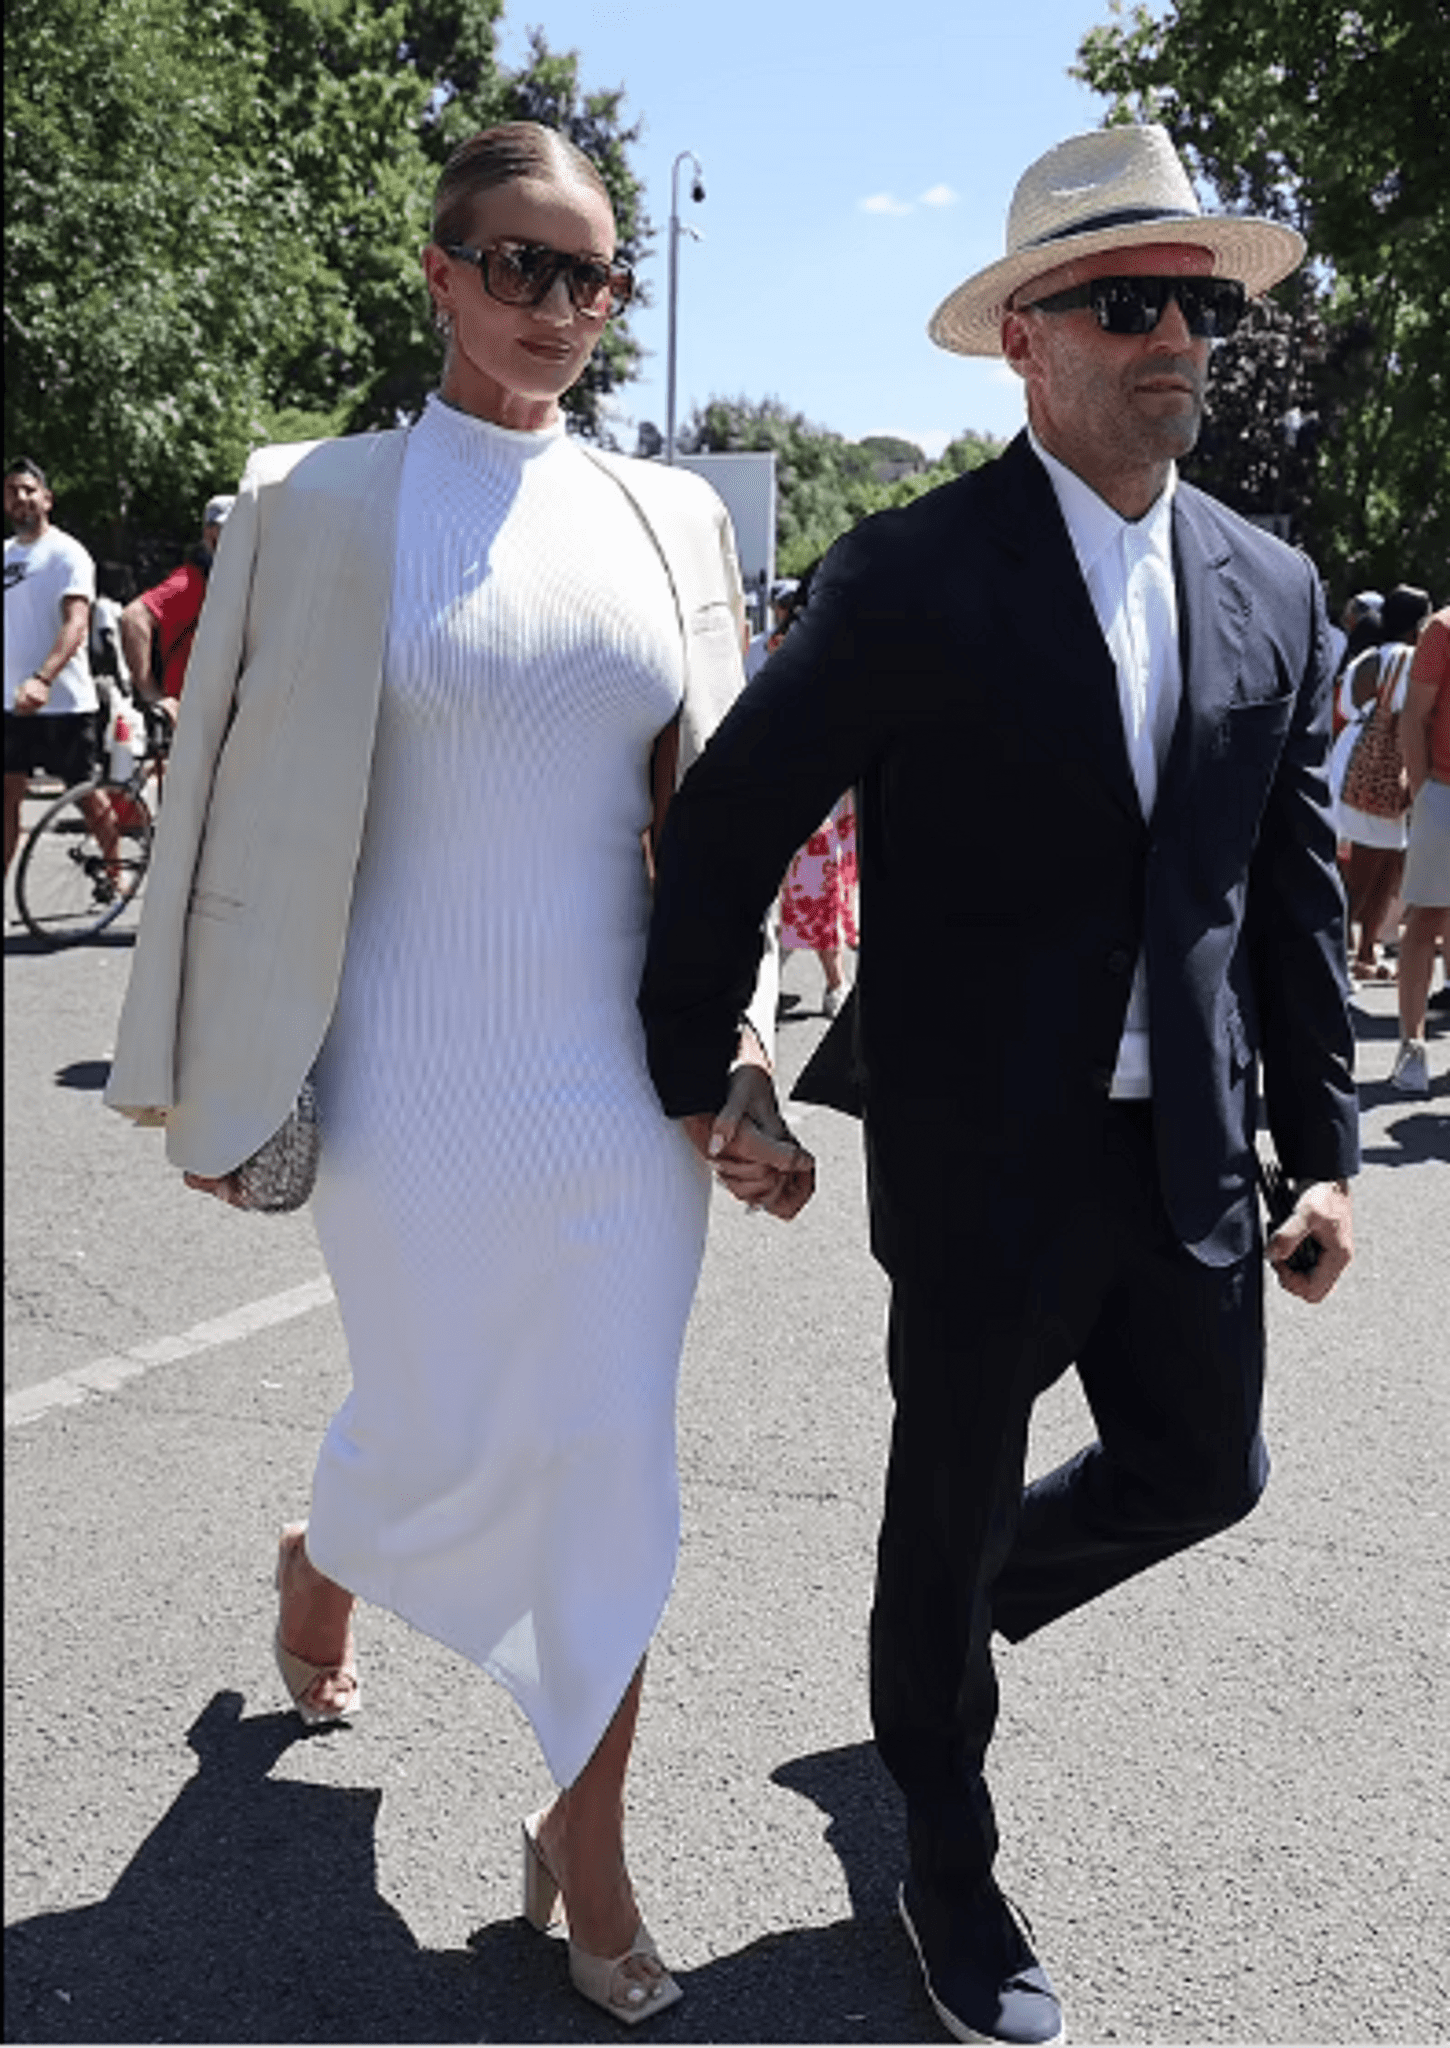 Rosie Huntington-Whiteley And Jason Statham Arrived In The UK For A Tennis Tournament To Watch The Men's Singles Final